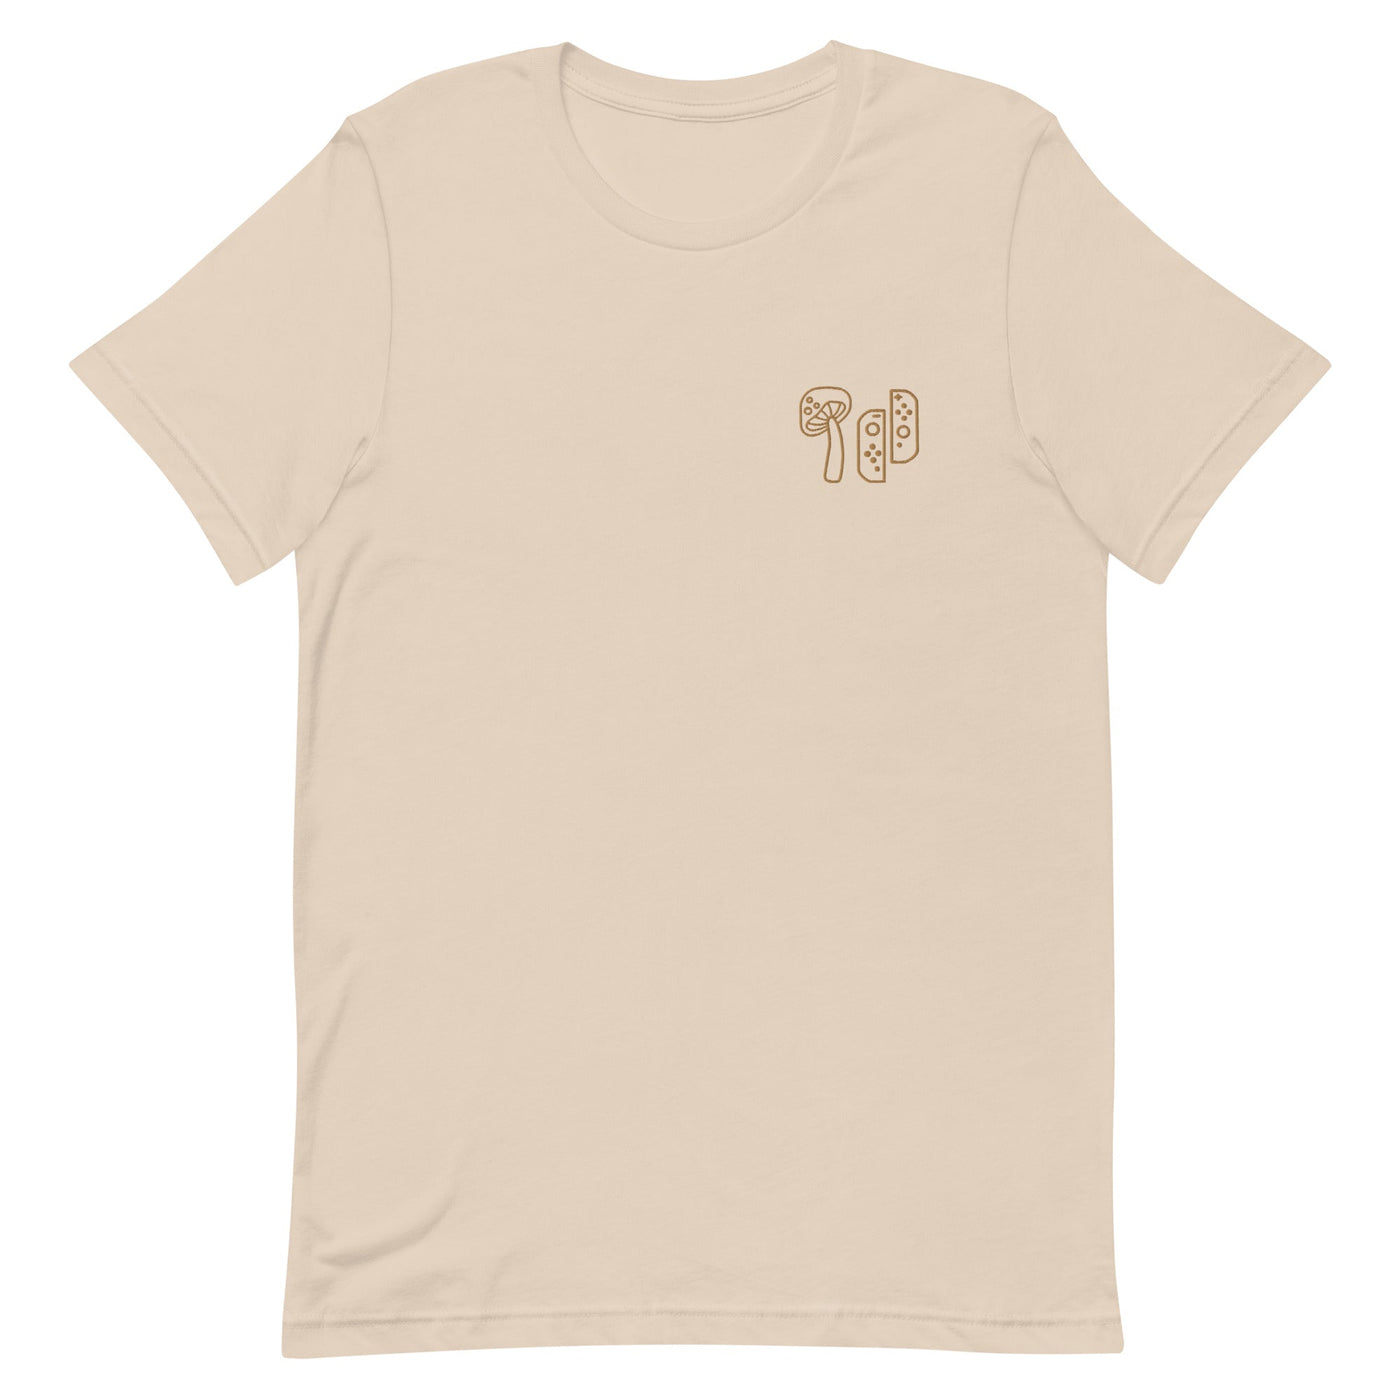 Mushroom & Switch | Embroidered Unisex t-shirt | Cozy Gamer Threads and Thistles Inventory Soft Cream XS 